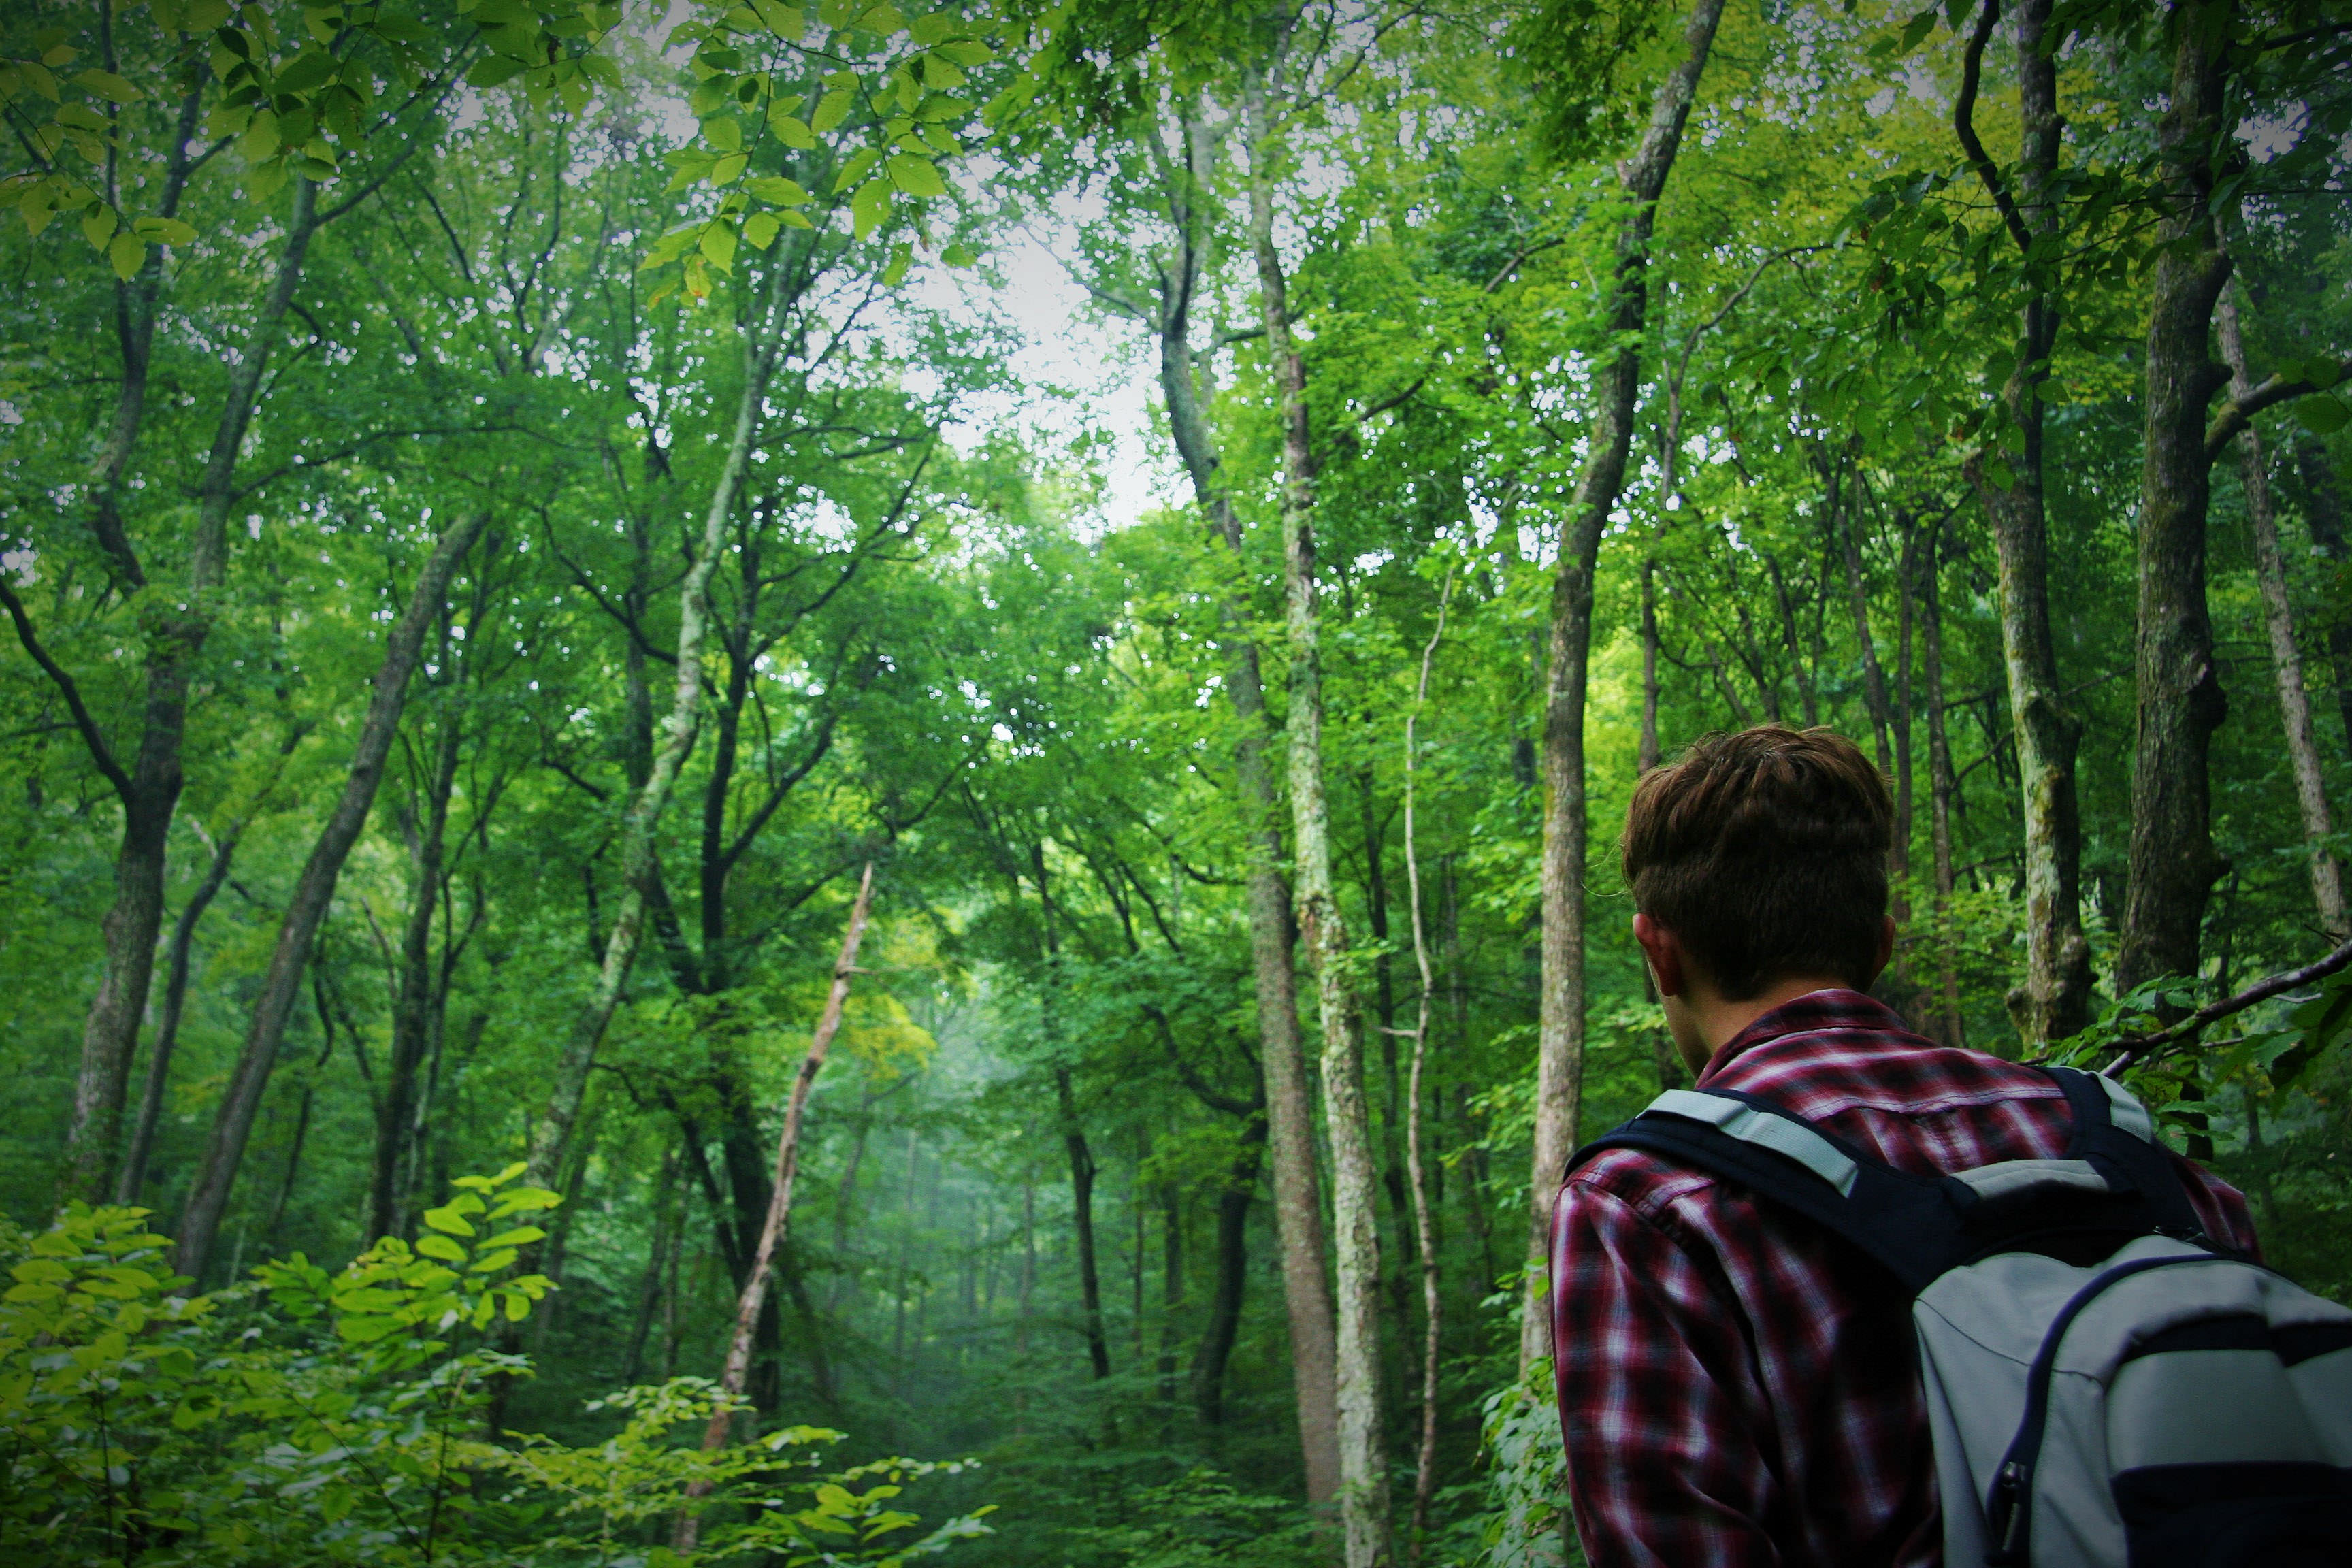 A person hiking in a lush forest.